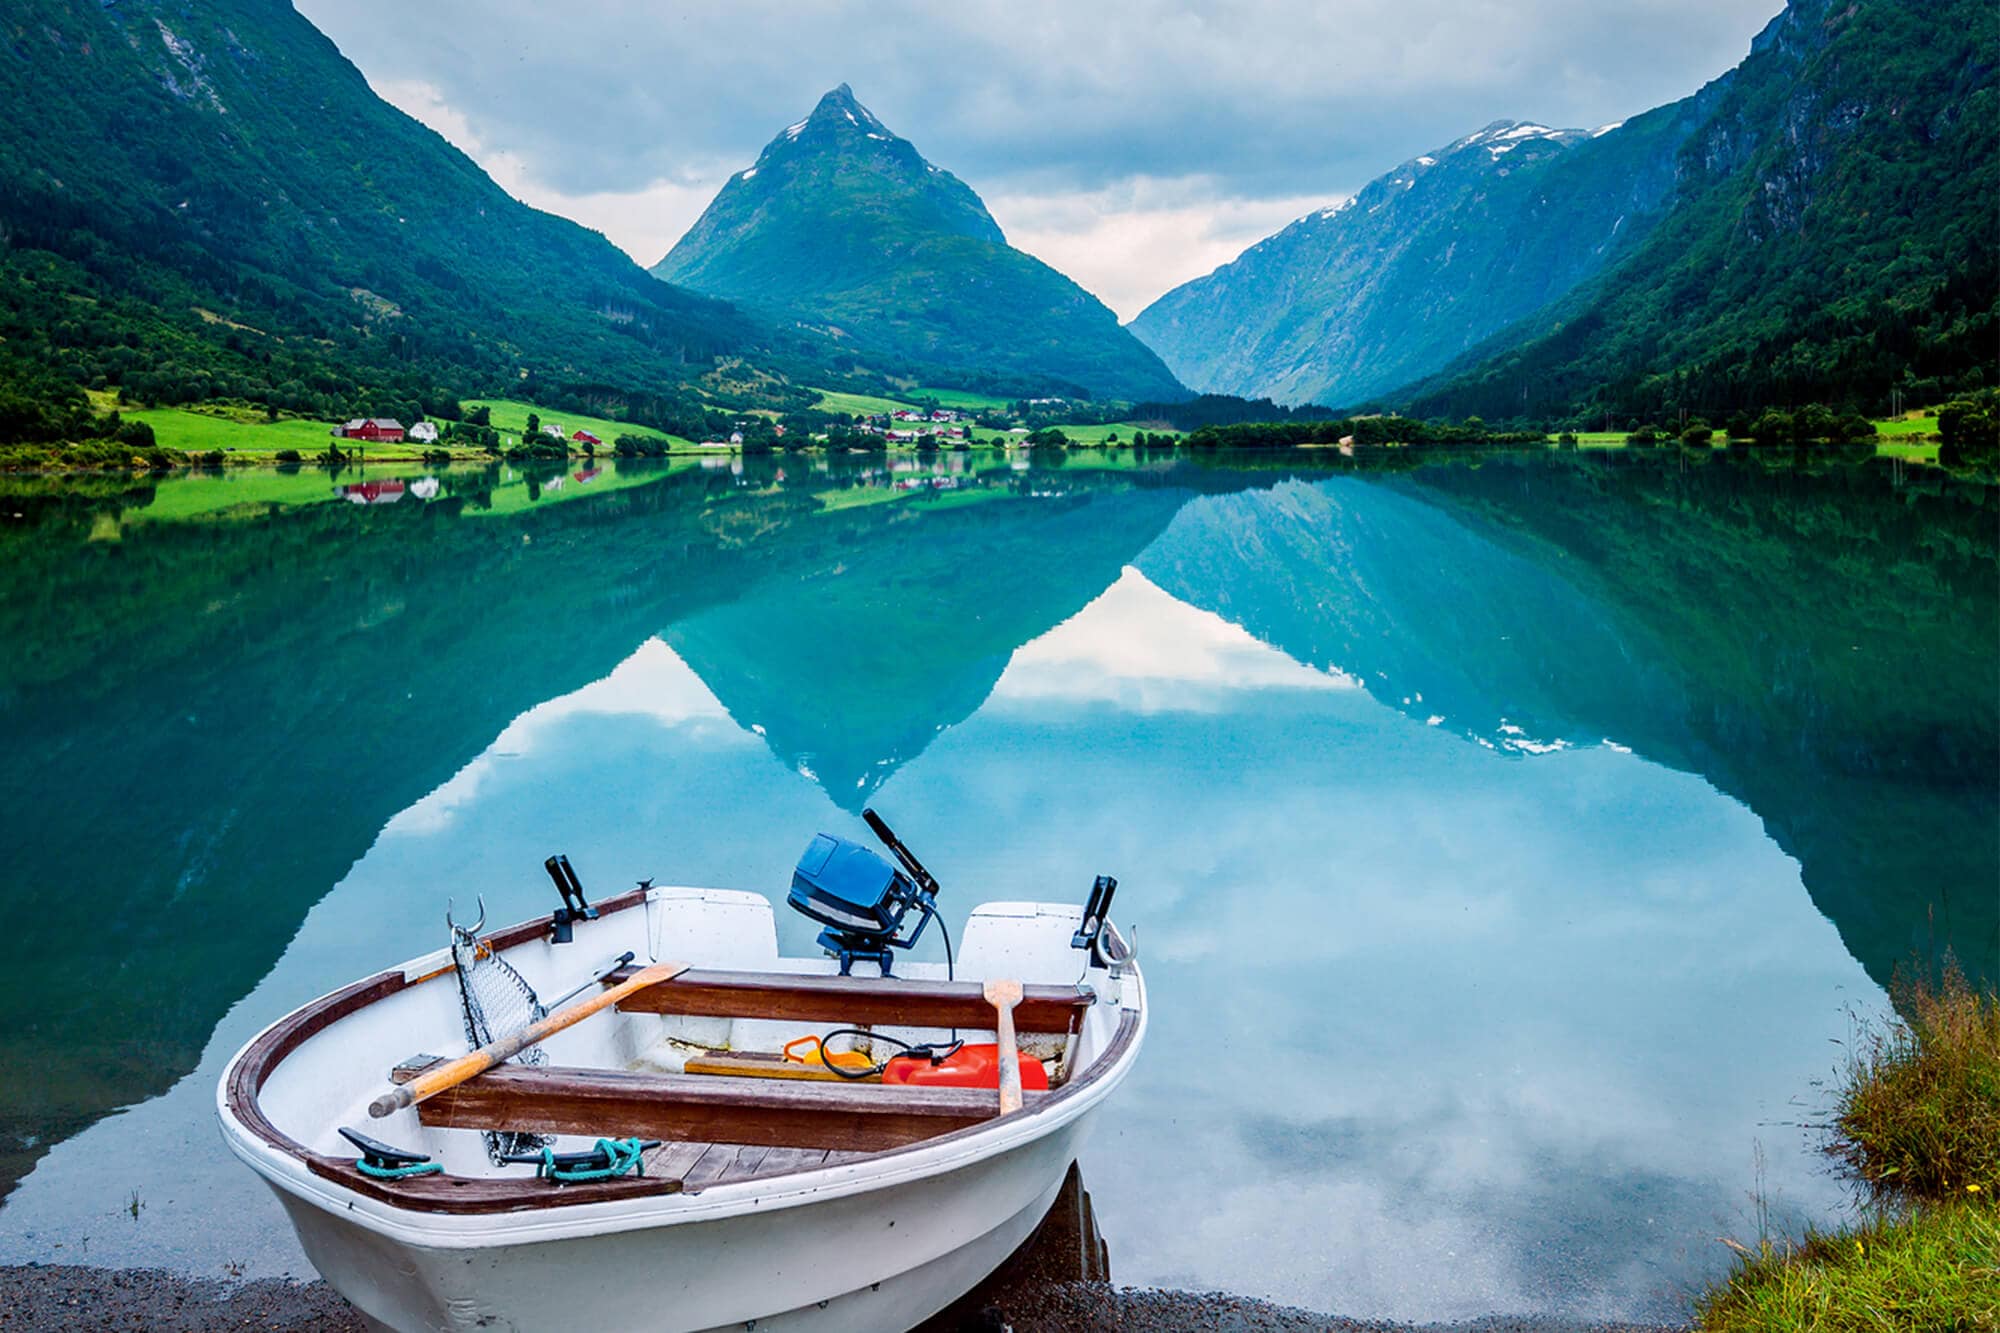 Learn Norwegian: 20+ useful words & phrases to know before you visit